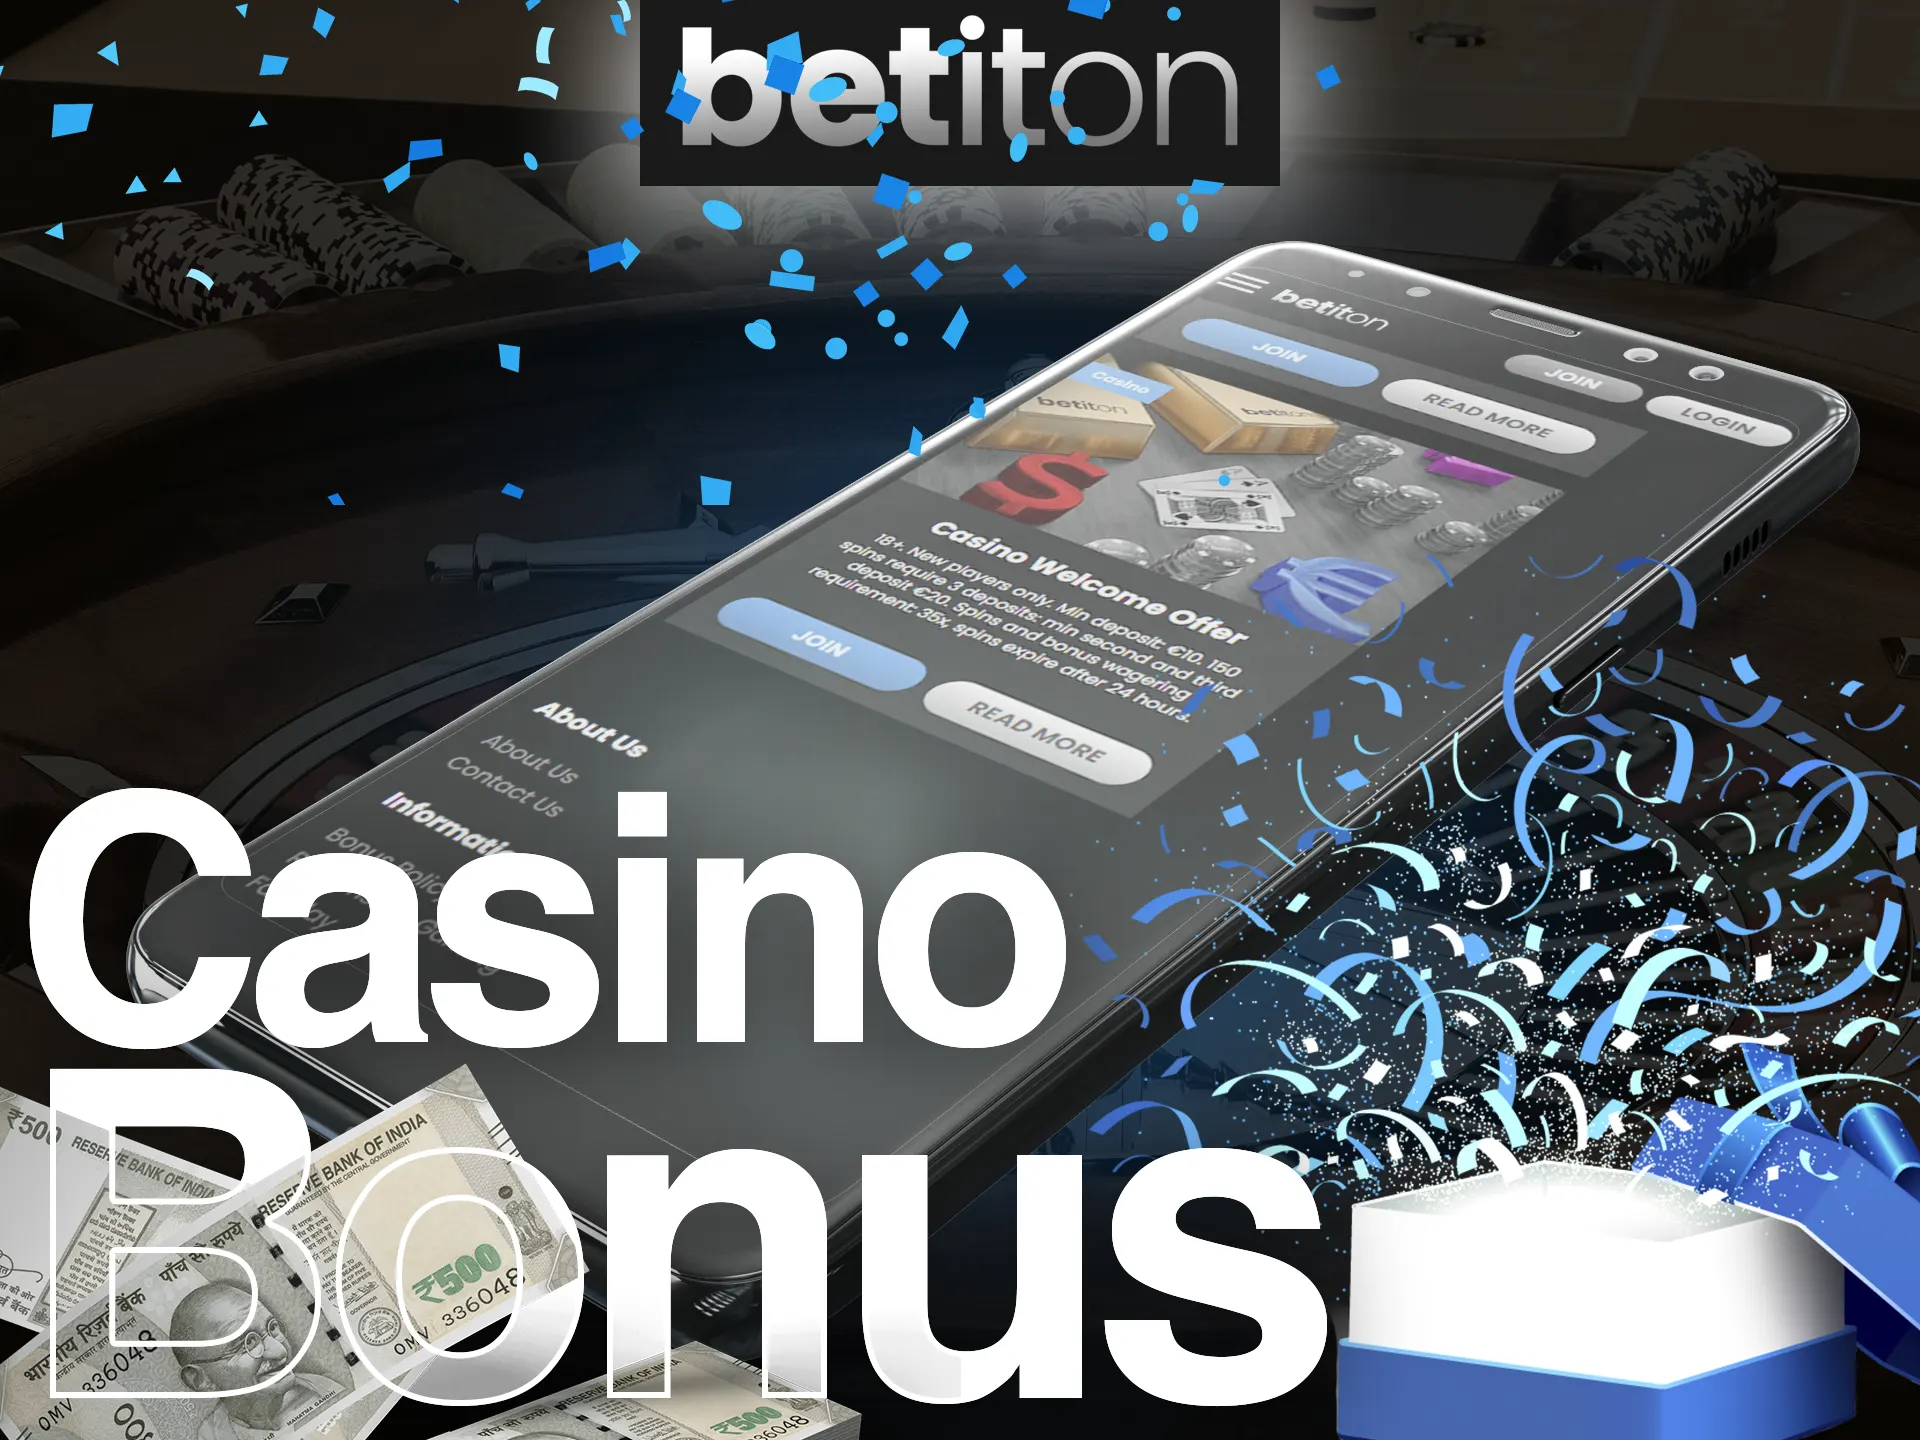 Play casino games and claim your reward at the Betiton.